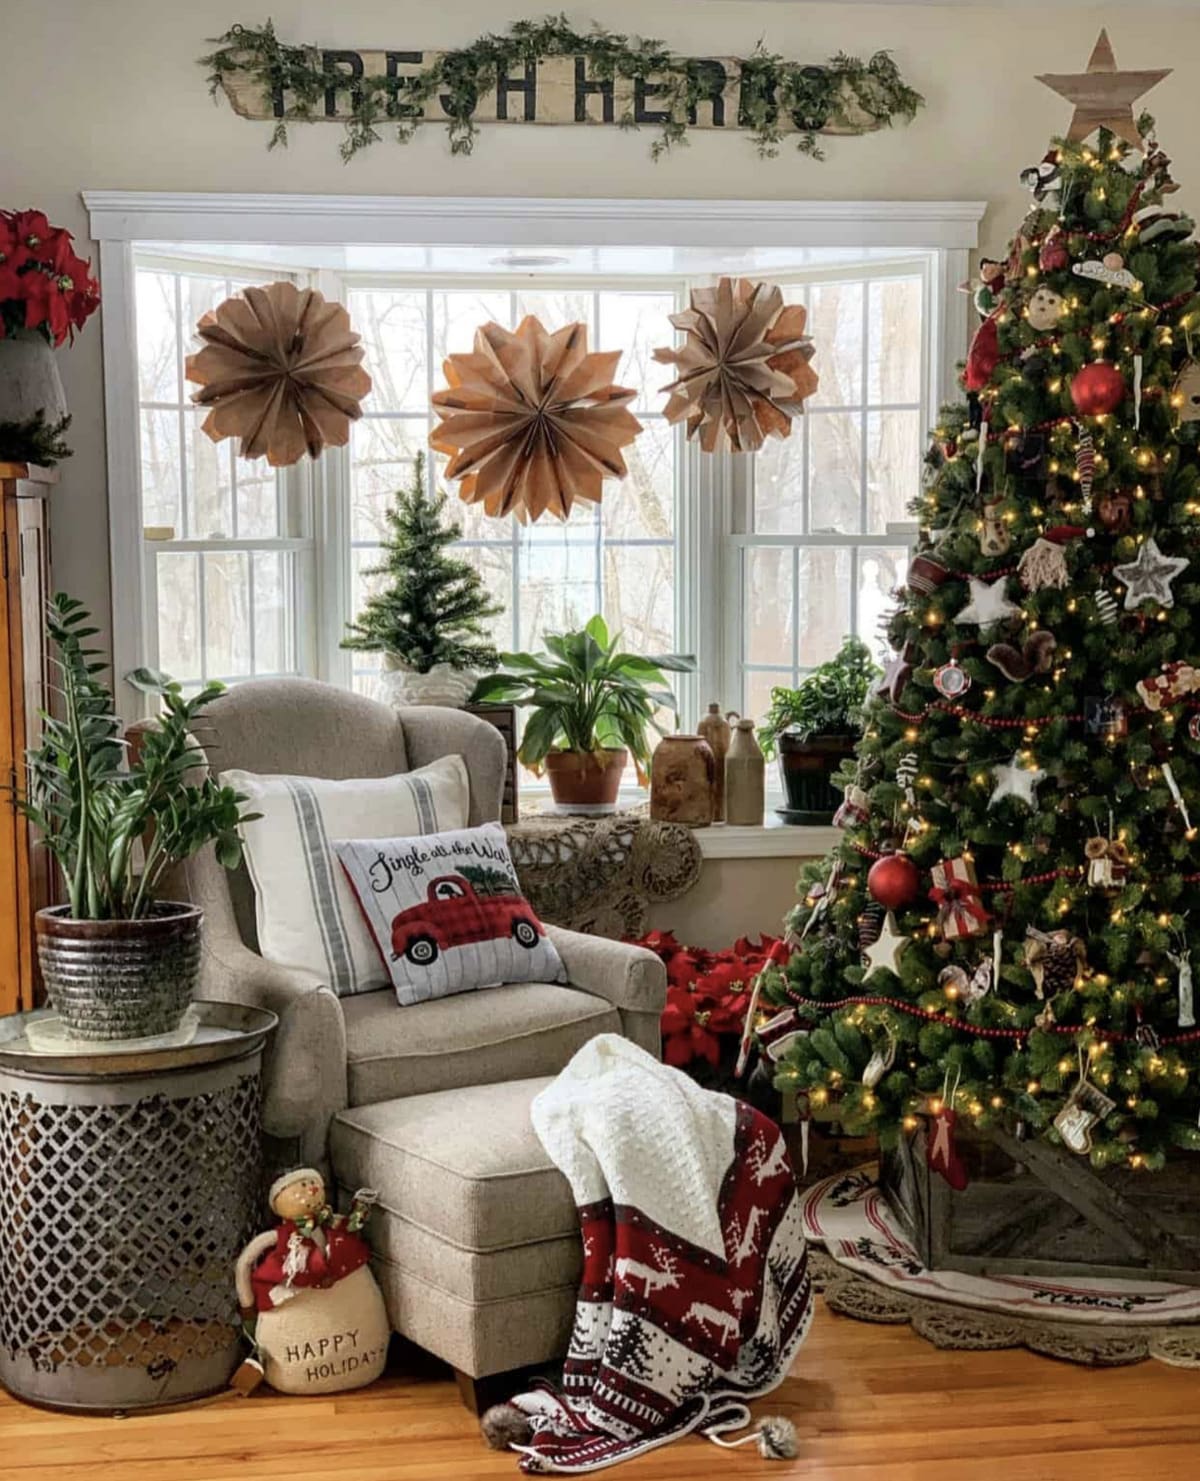 cozy Christmas space styled with a Christmas tree and snowflakes made out of paper bags